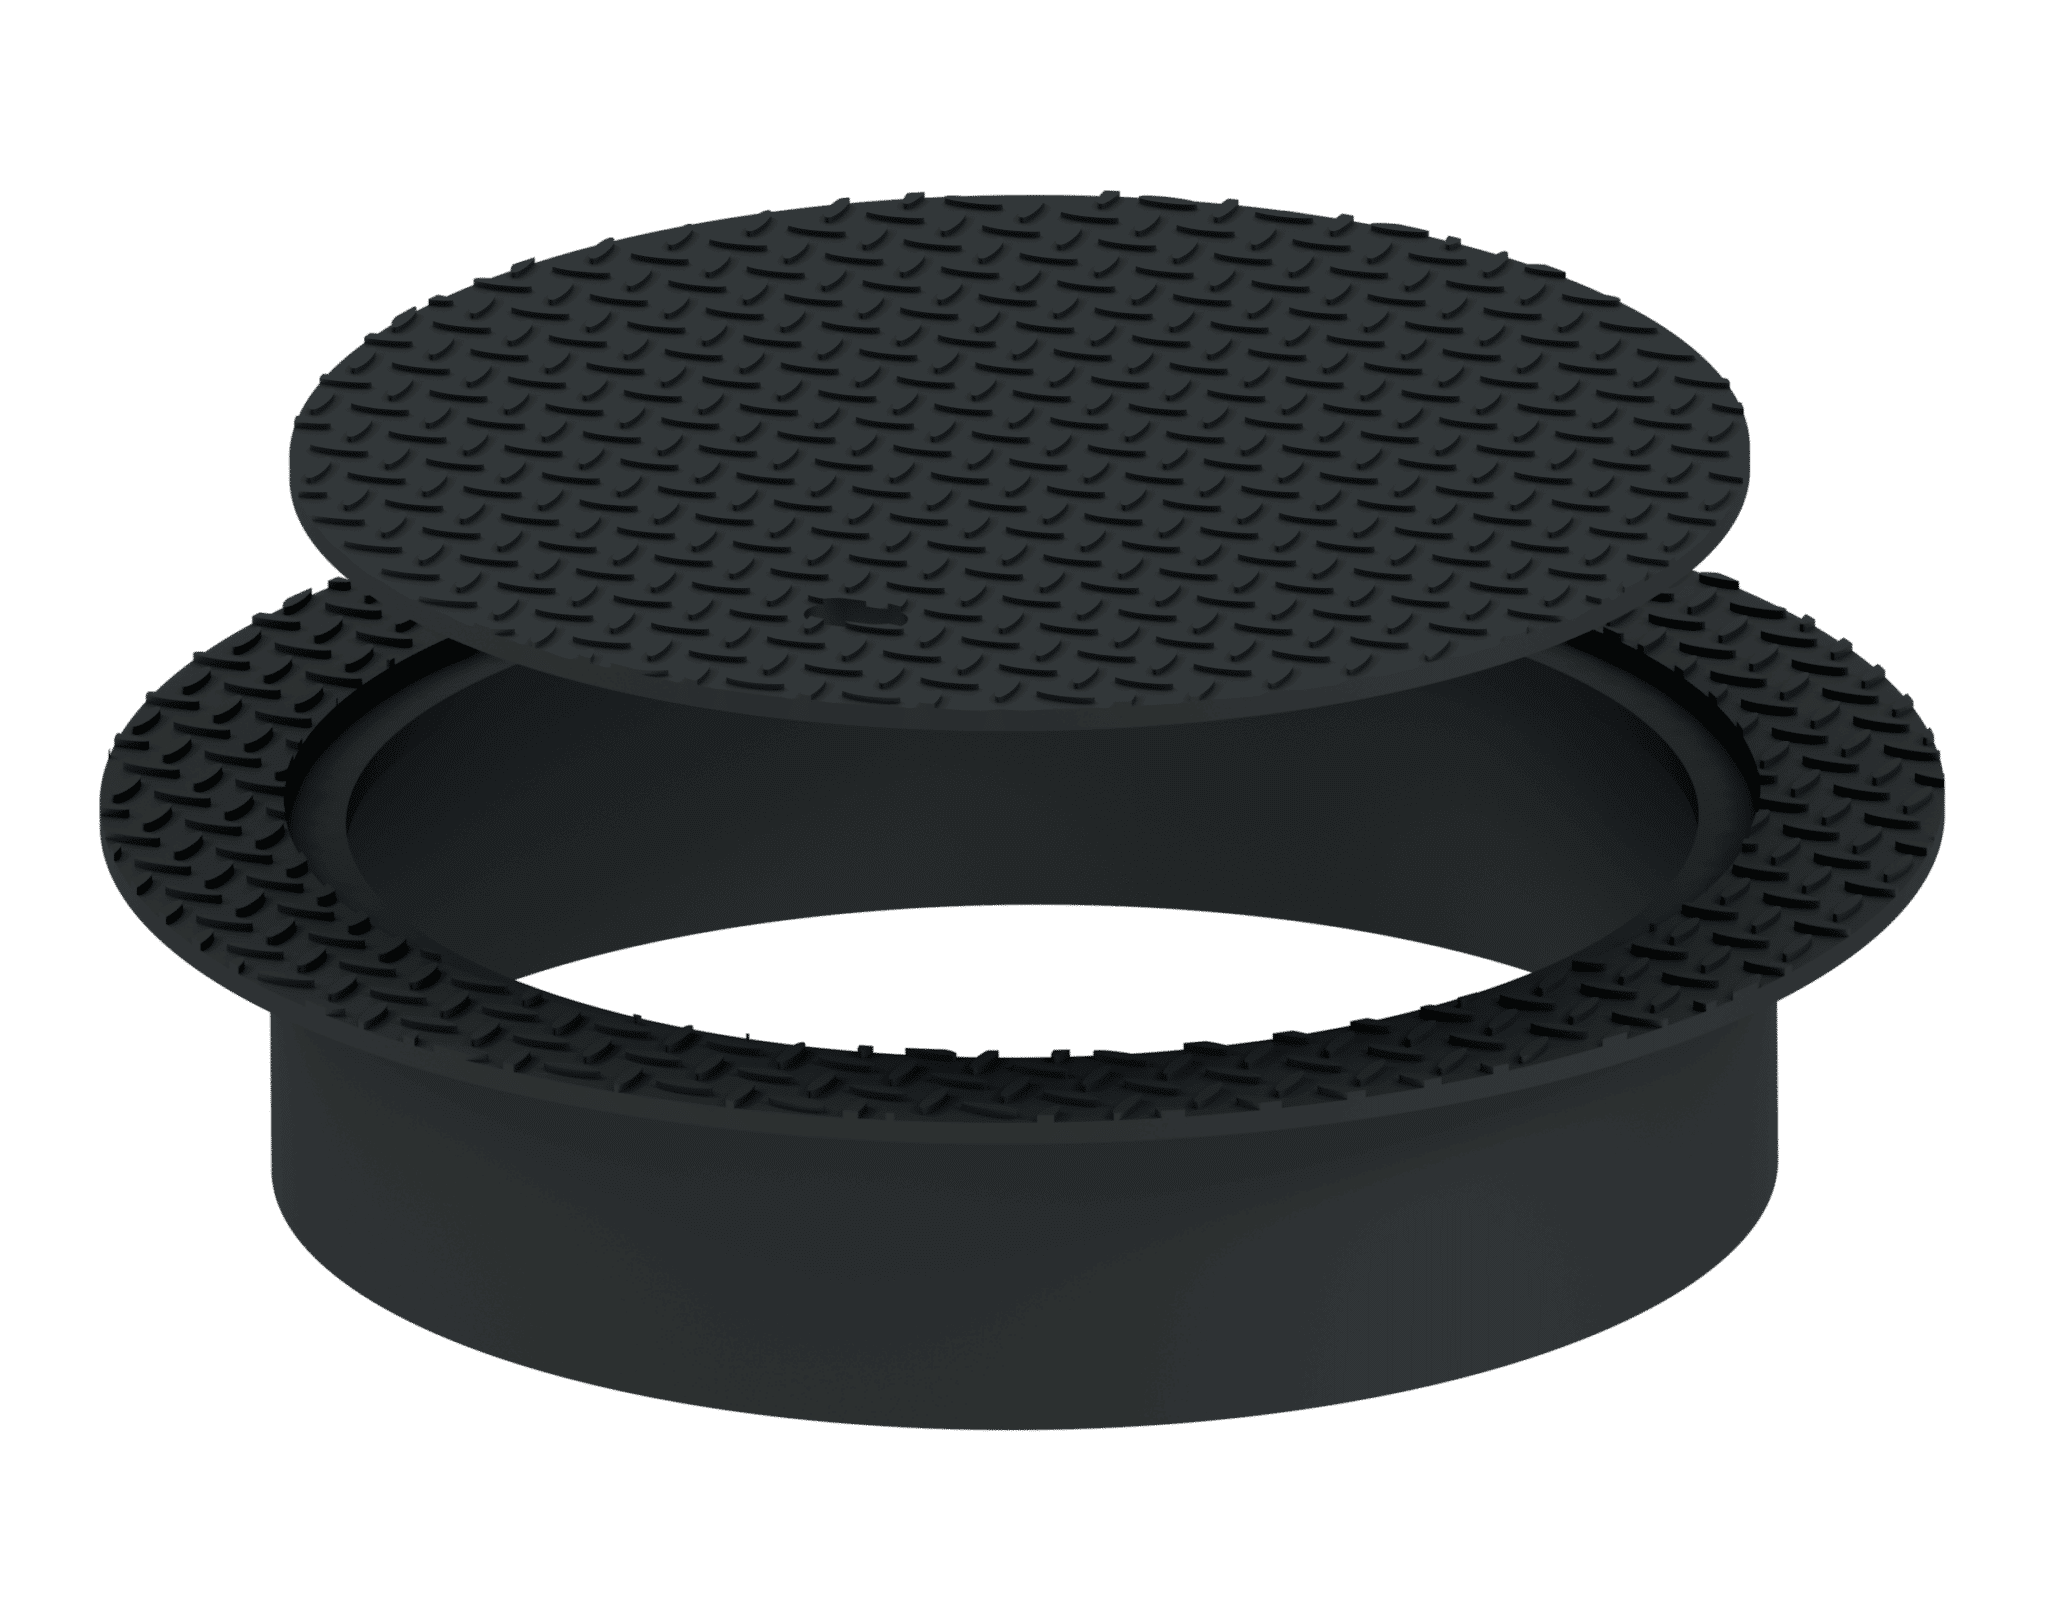 TOP FLANGE ROUND COVER AND FRAME